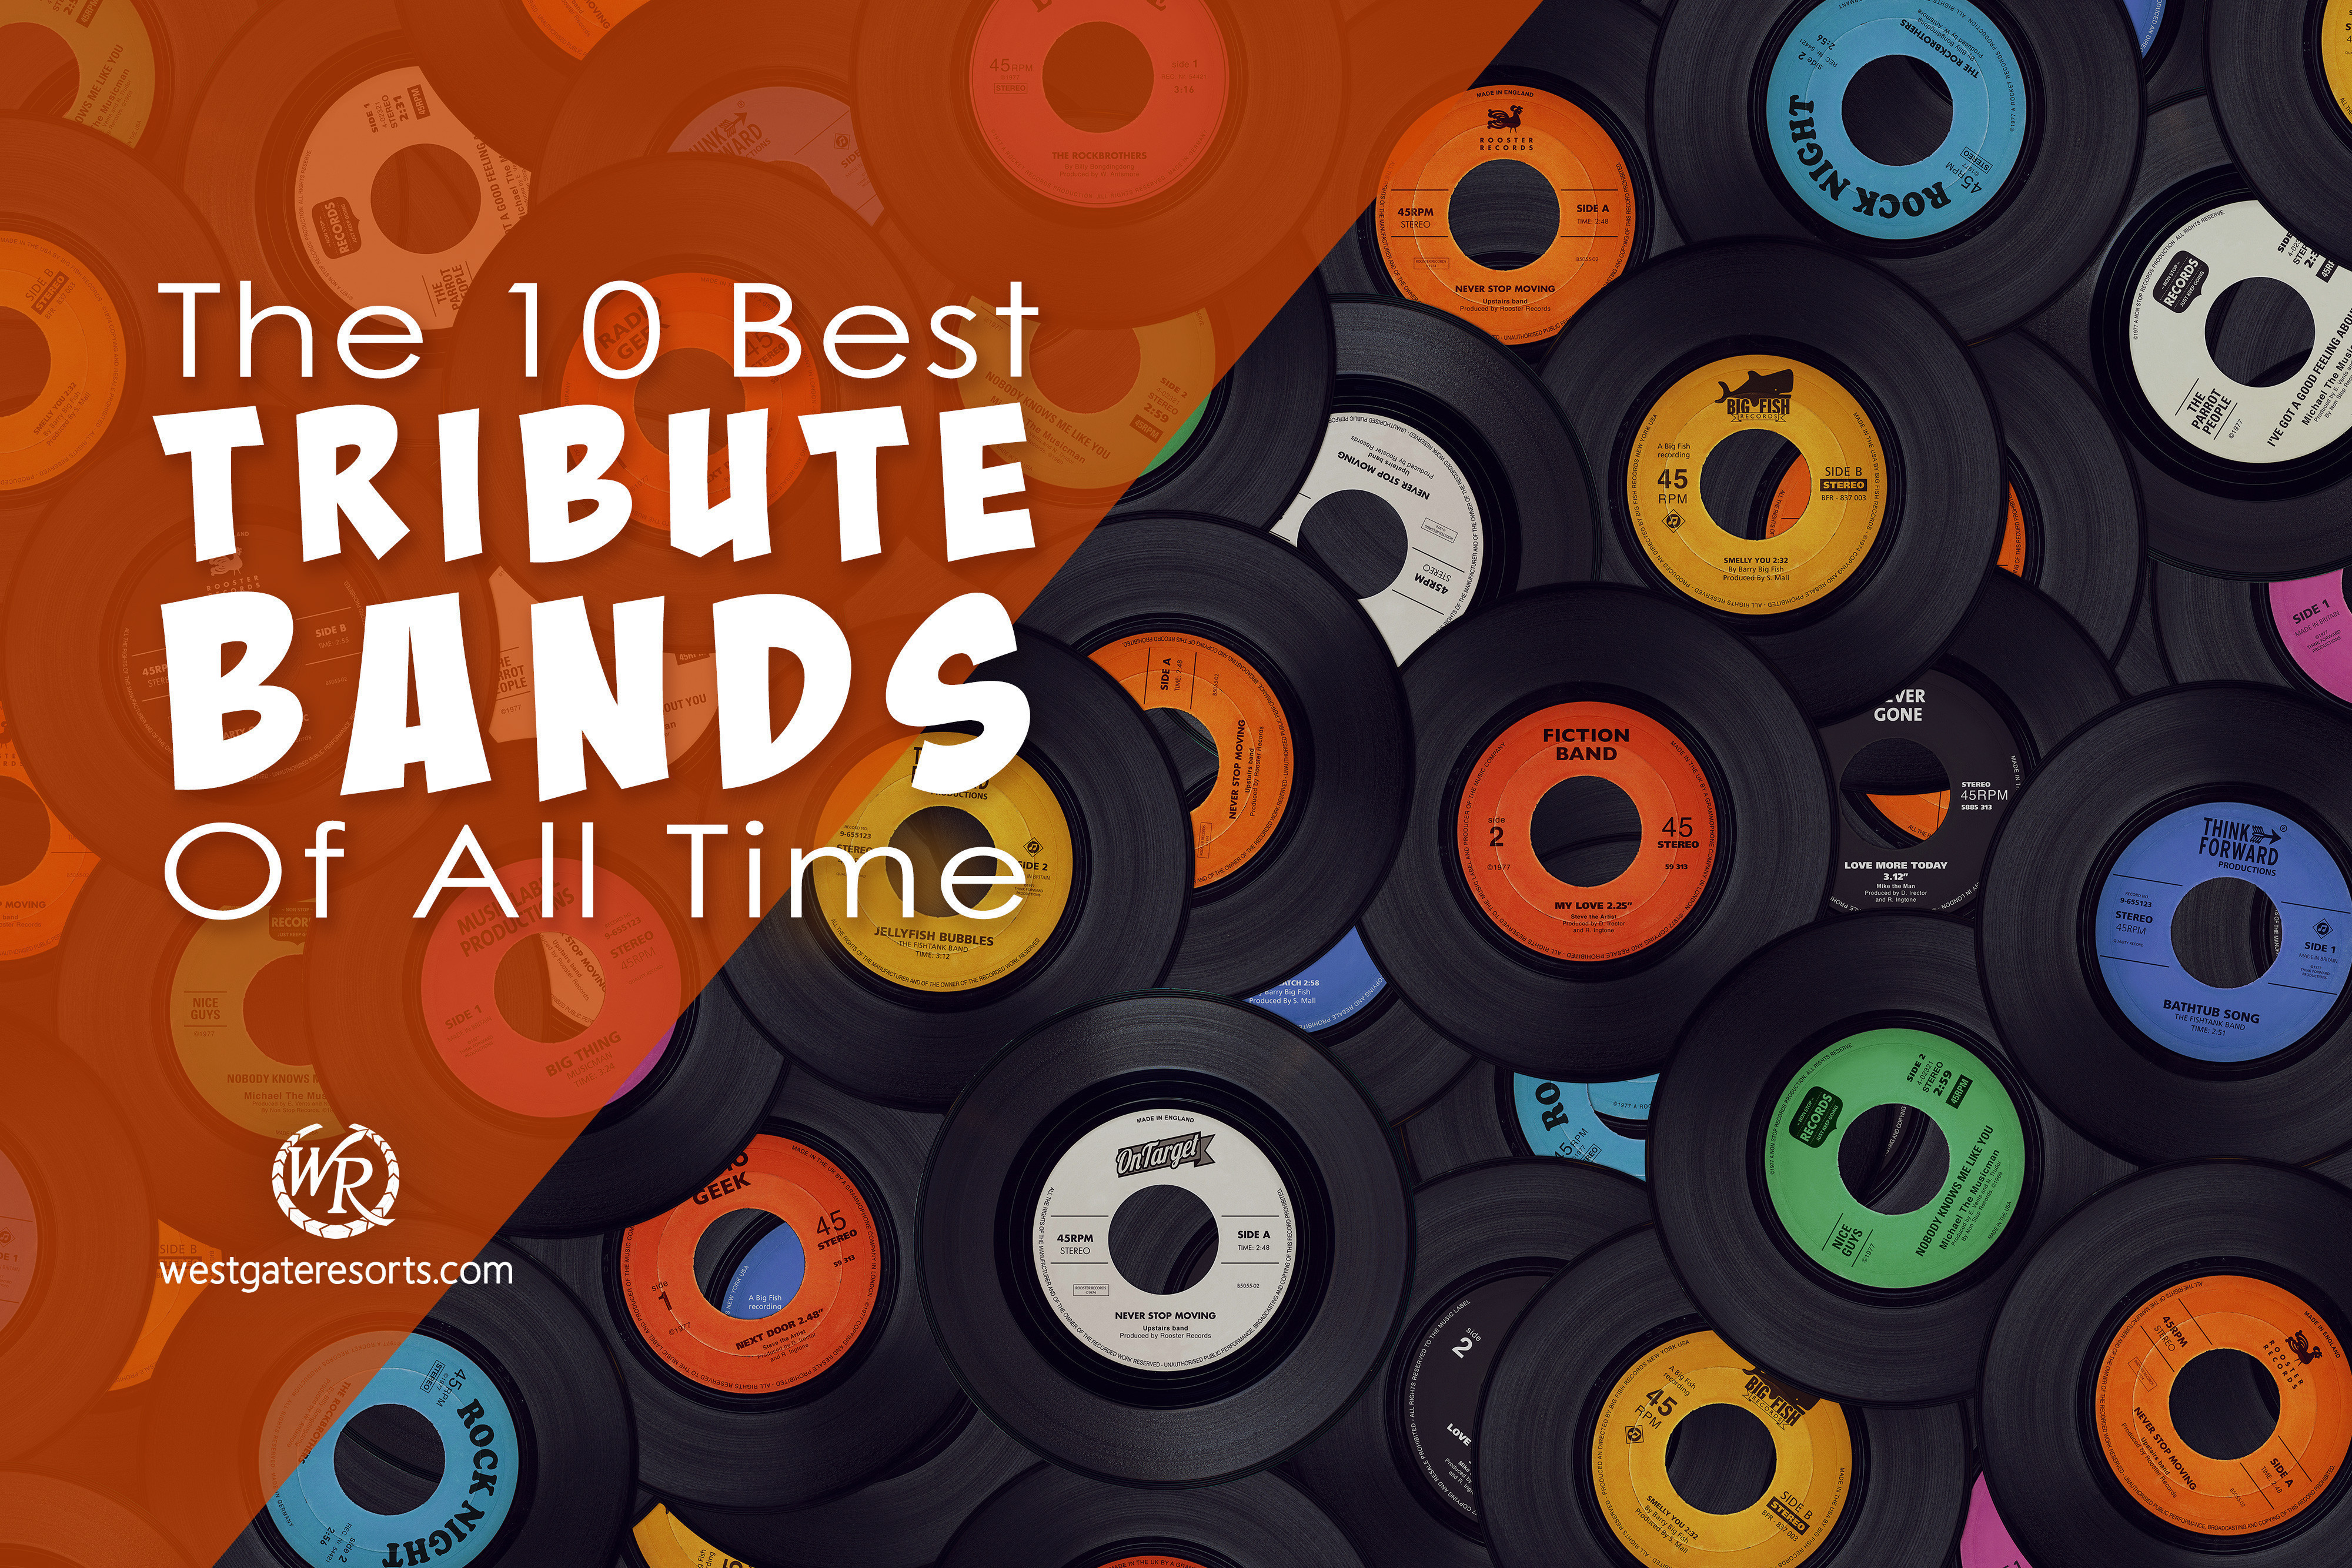 The 10 Best Tribute Bands of All Time